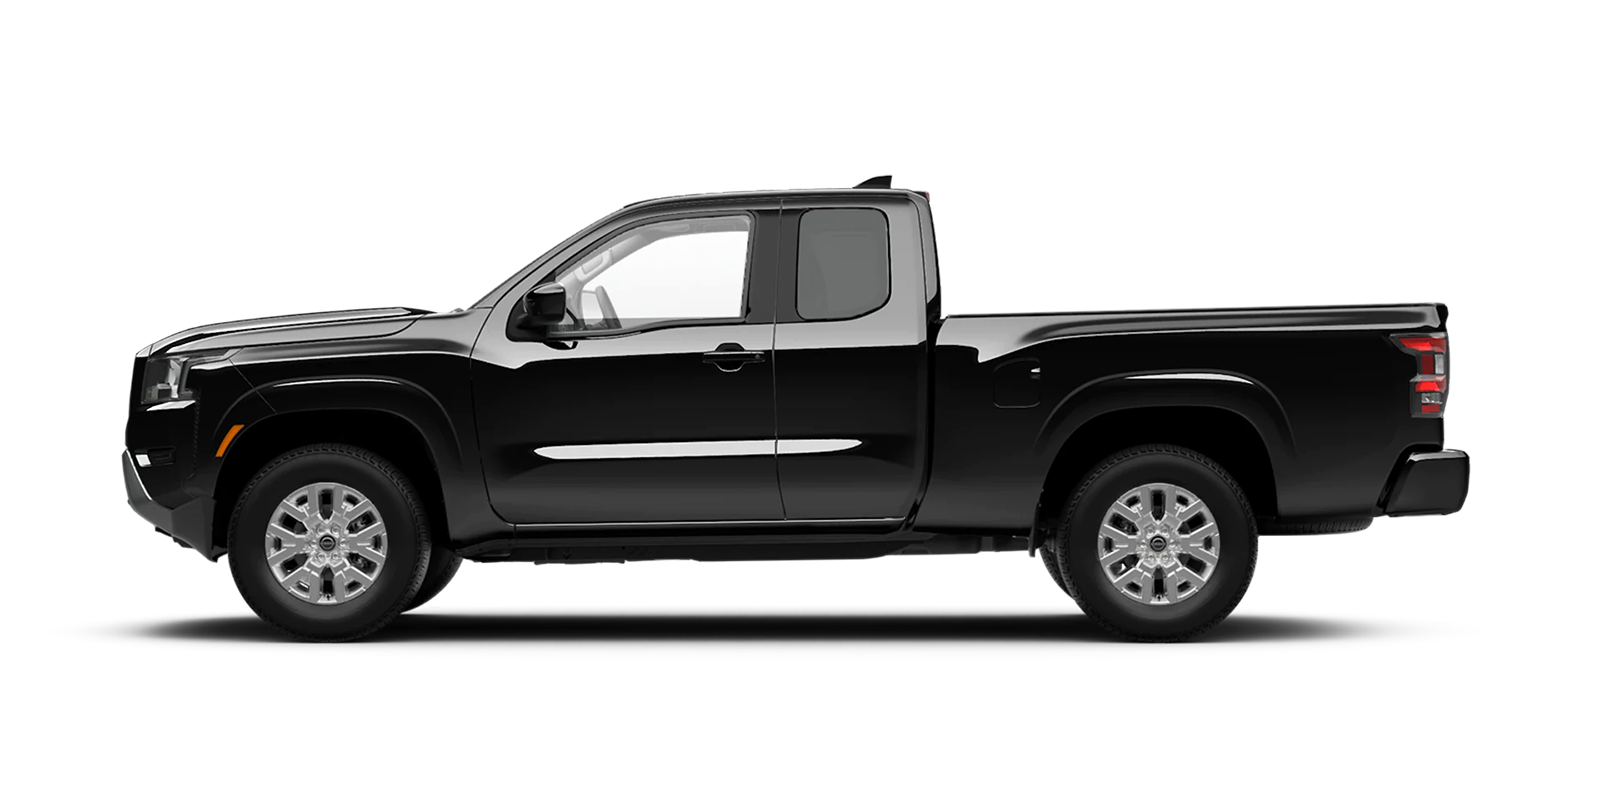 2022 Frontier King Cab SV 4x4 in Super Black | Cherokee County Nissan in Holly Springs GA